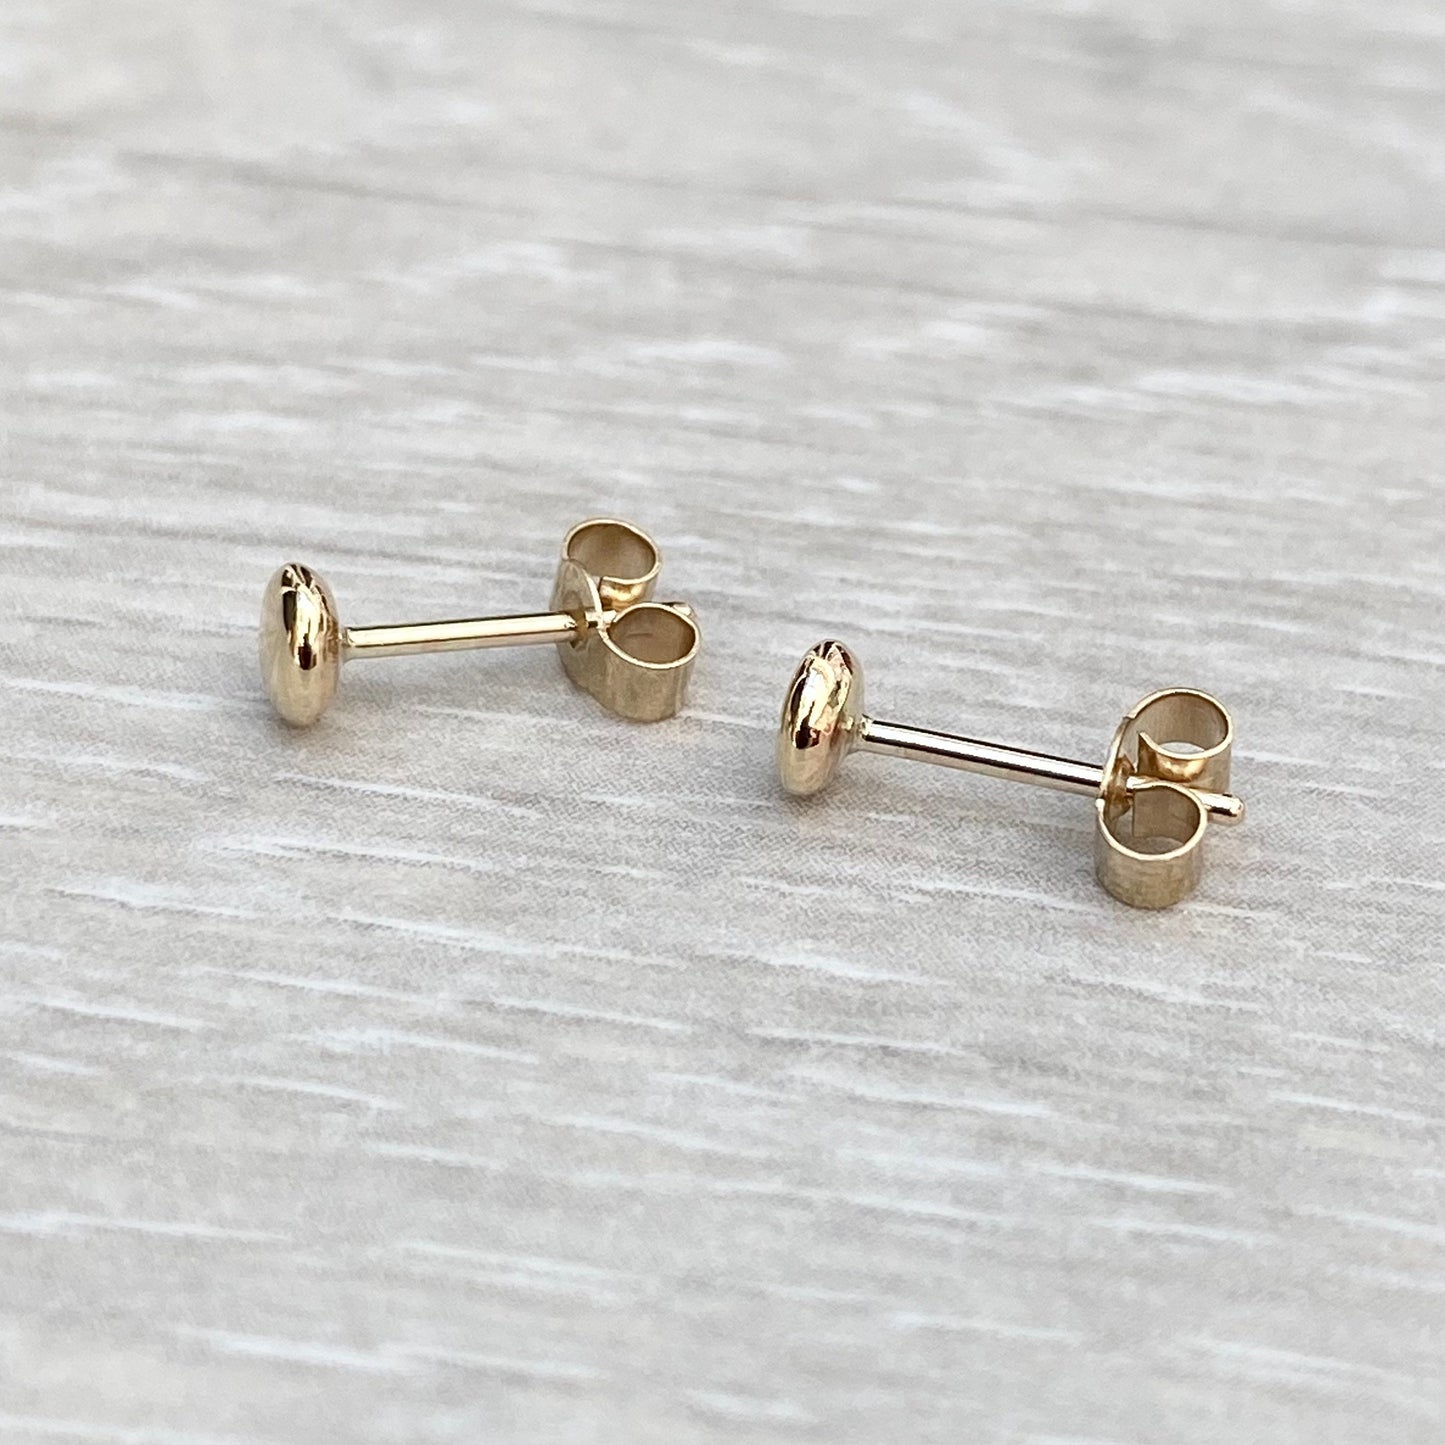 Handmade 9ct solid yellow gold tiny 3.7mm pebble nugget stud earrings